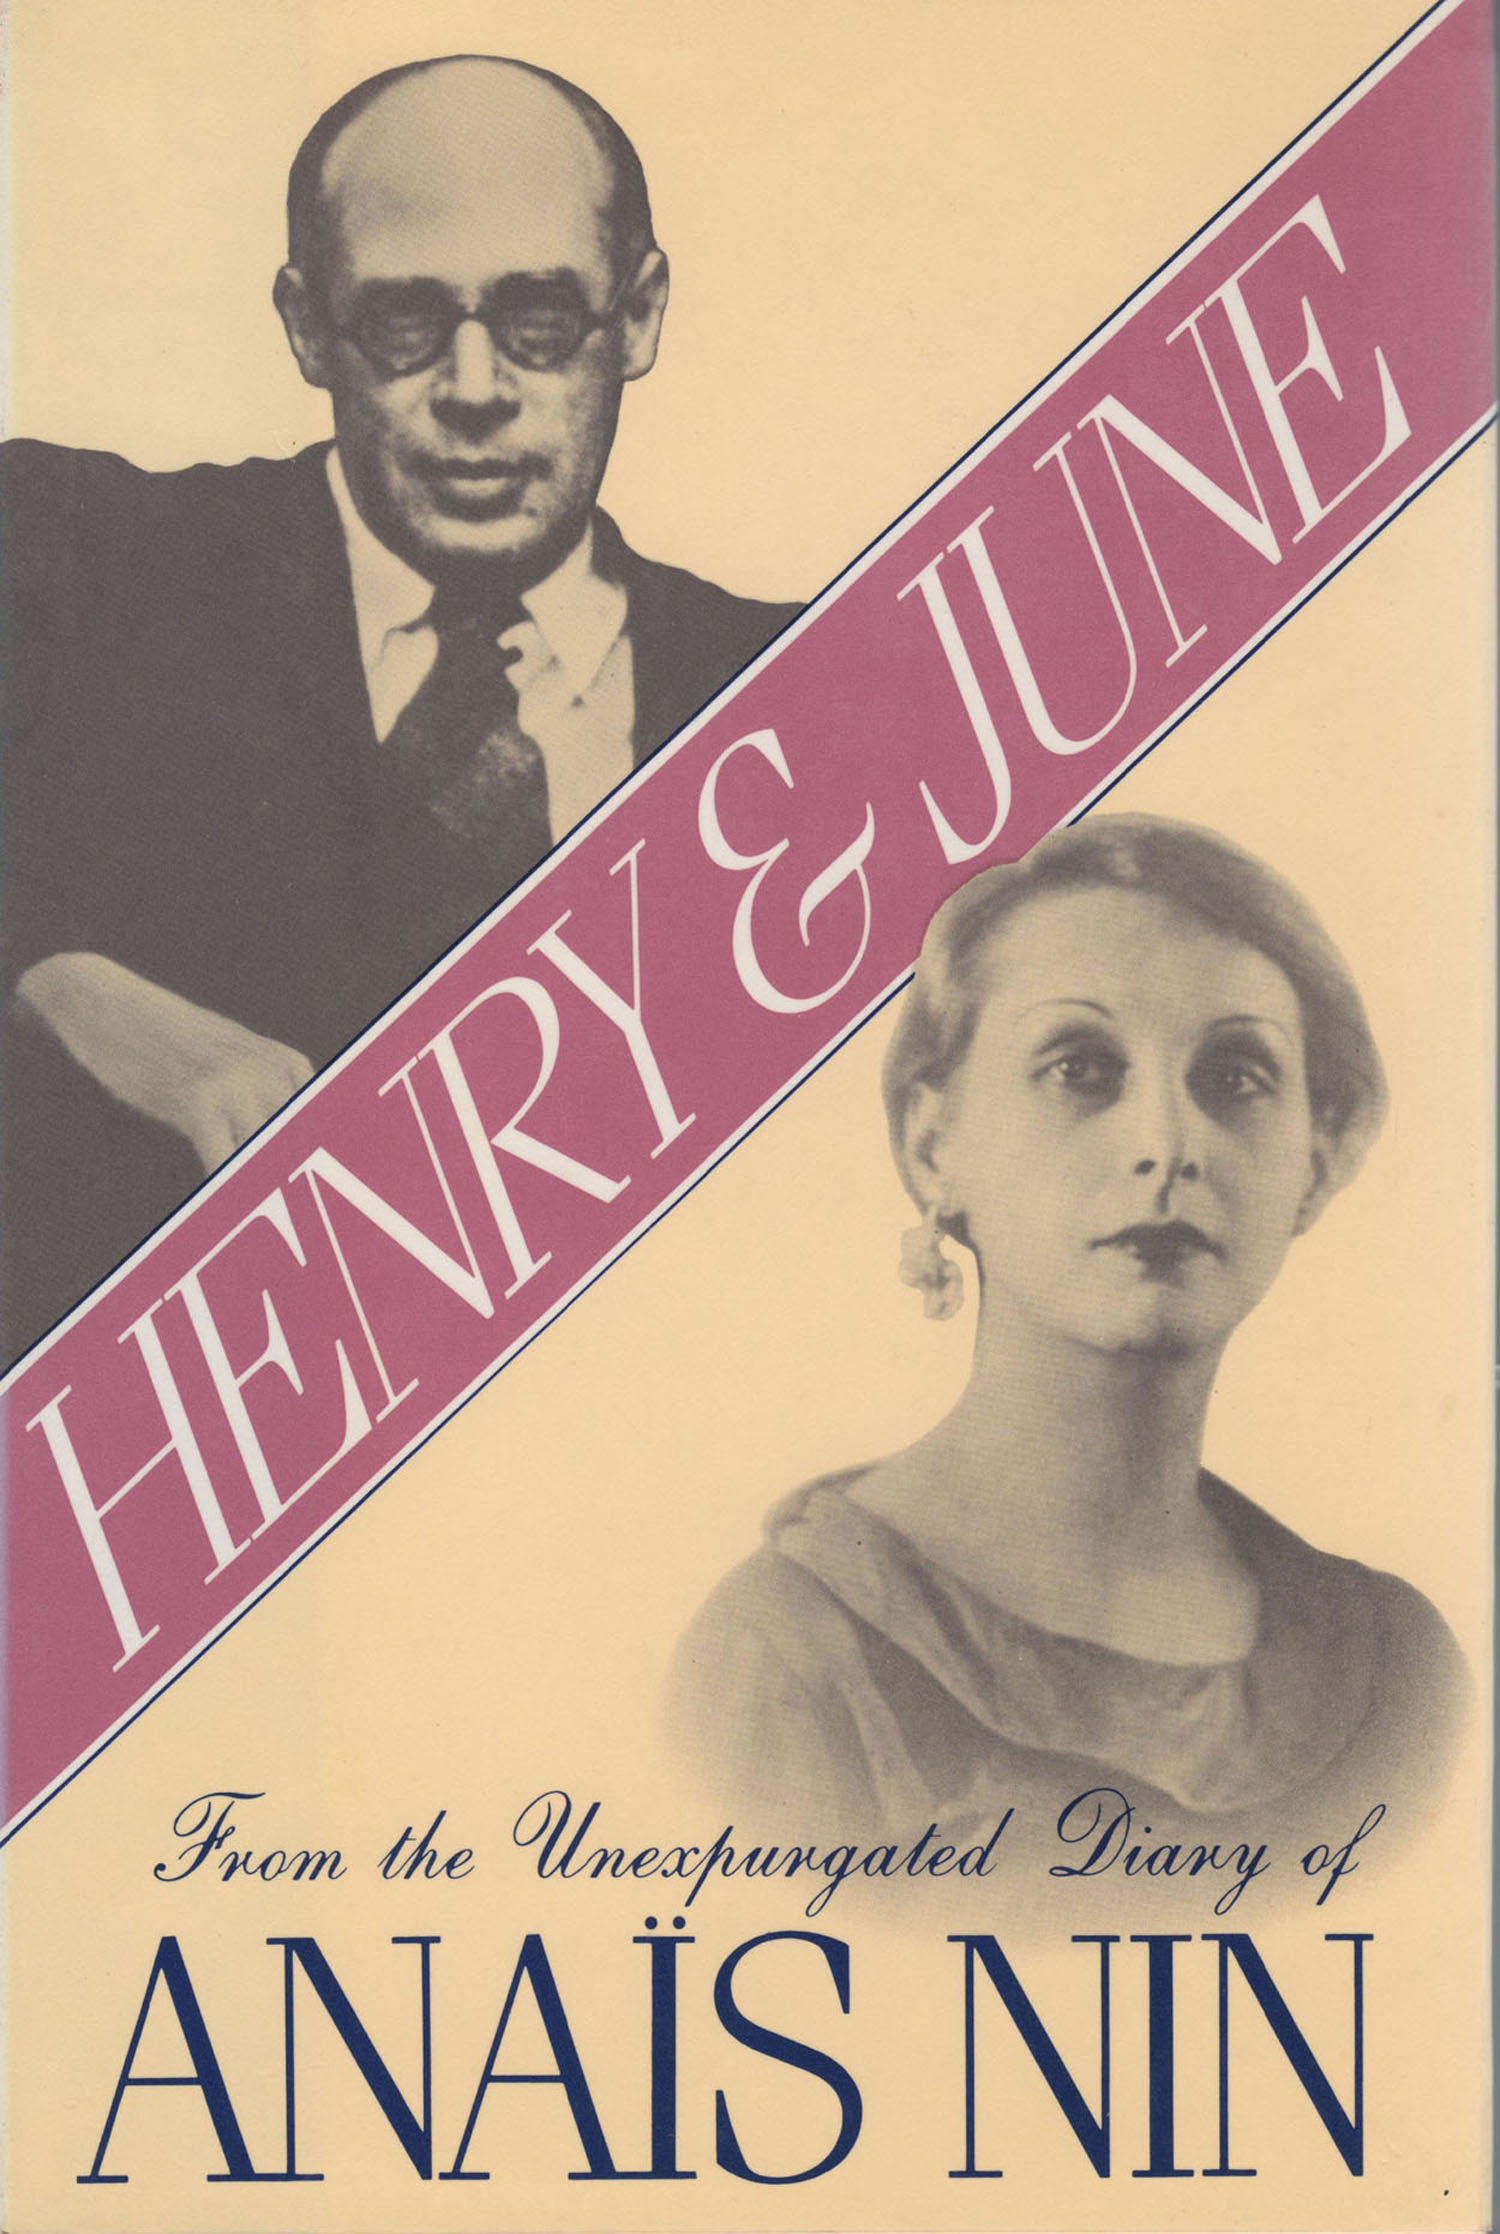 Henry and June: The Unexpurgated Diary of Anais Nin 1931-1932